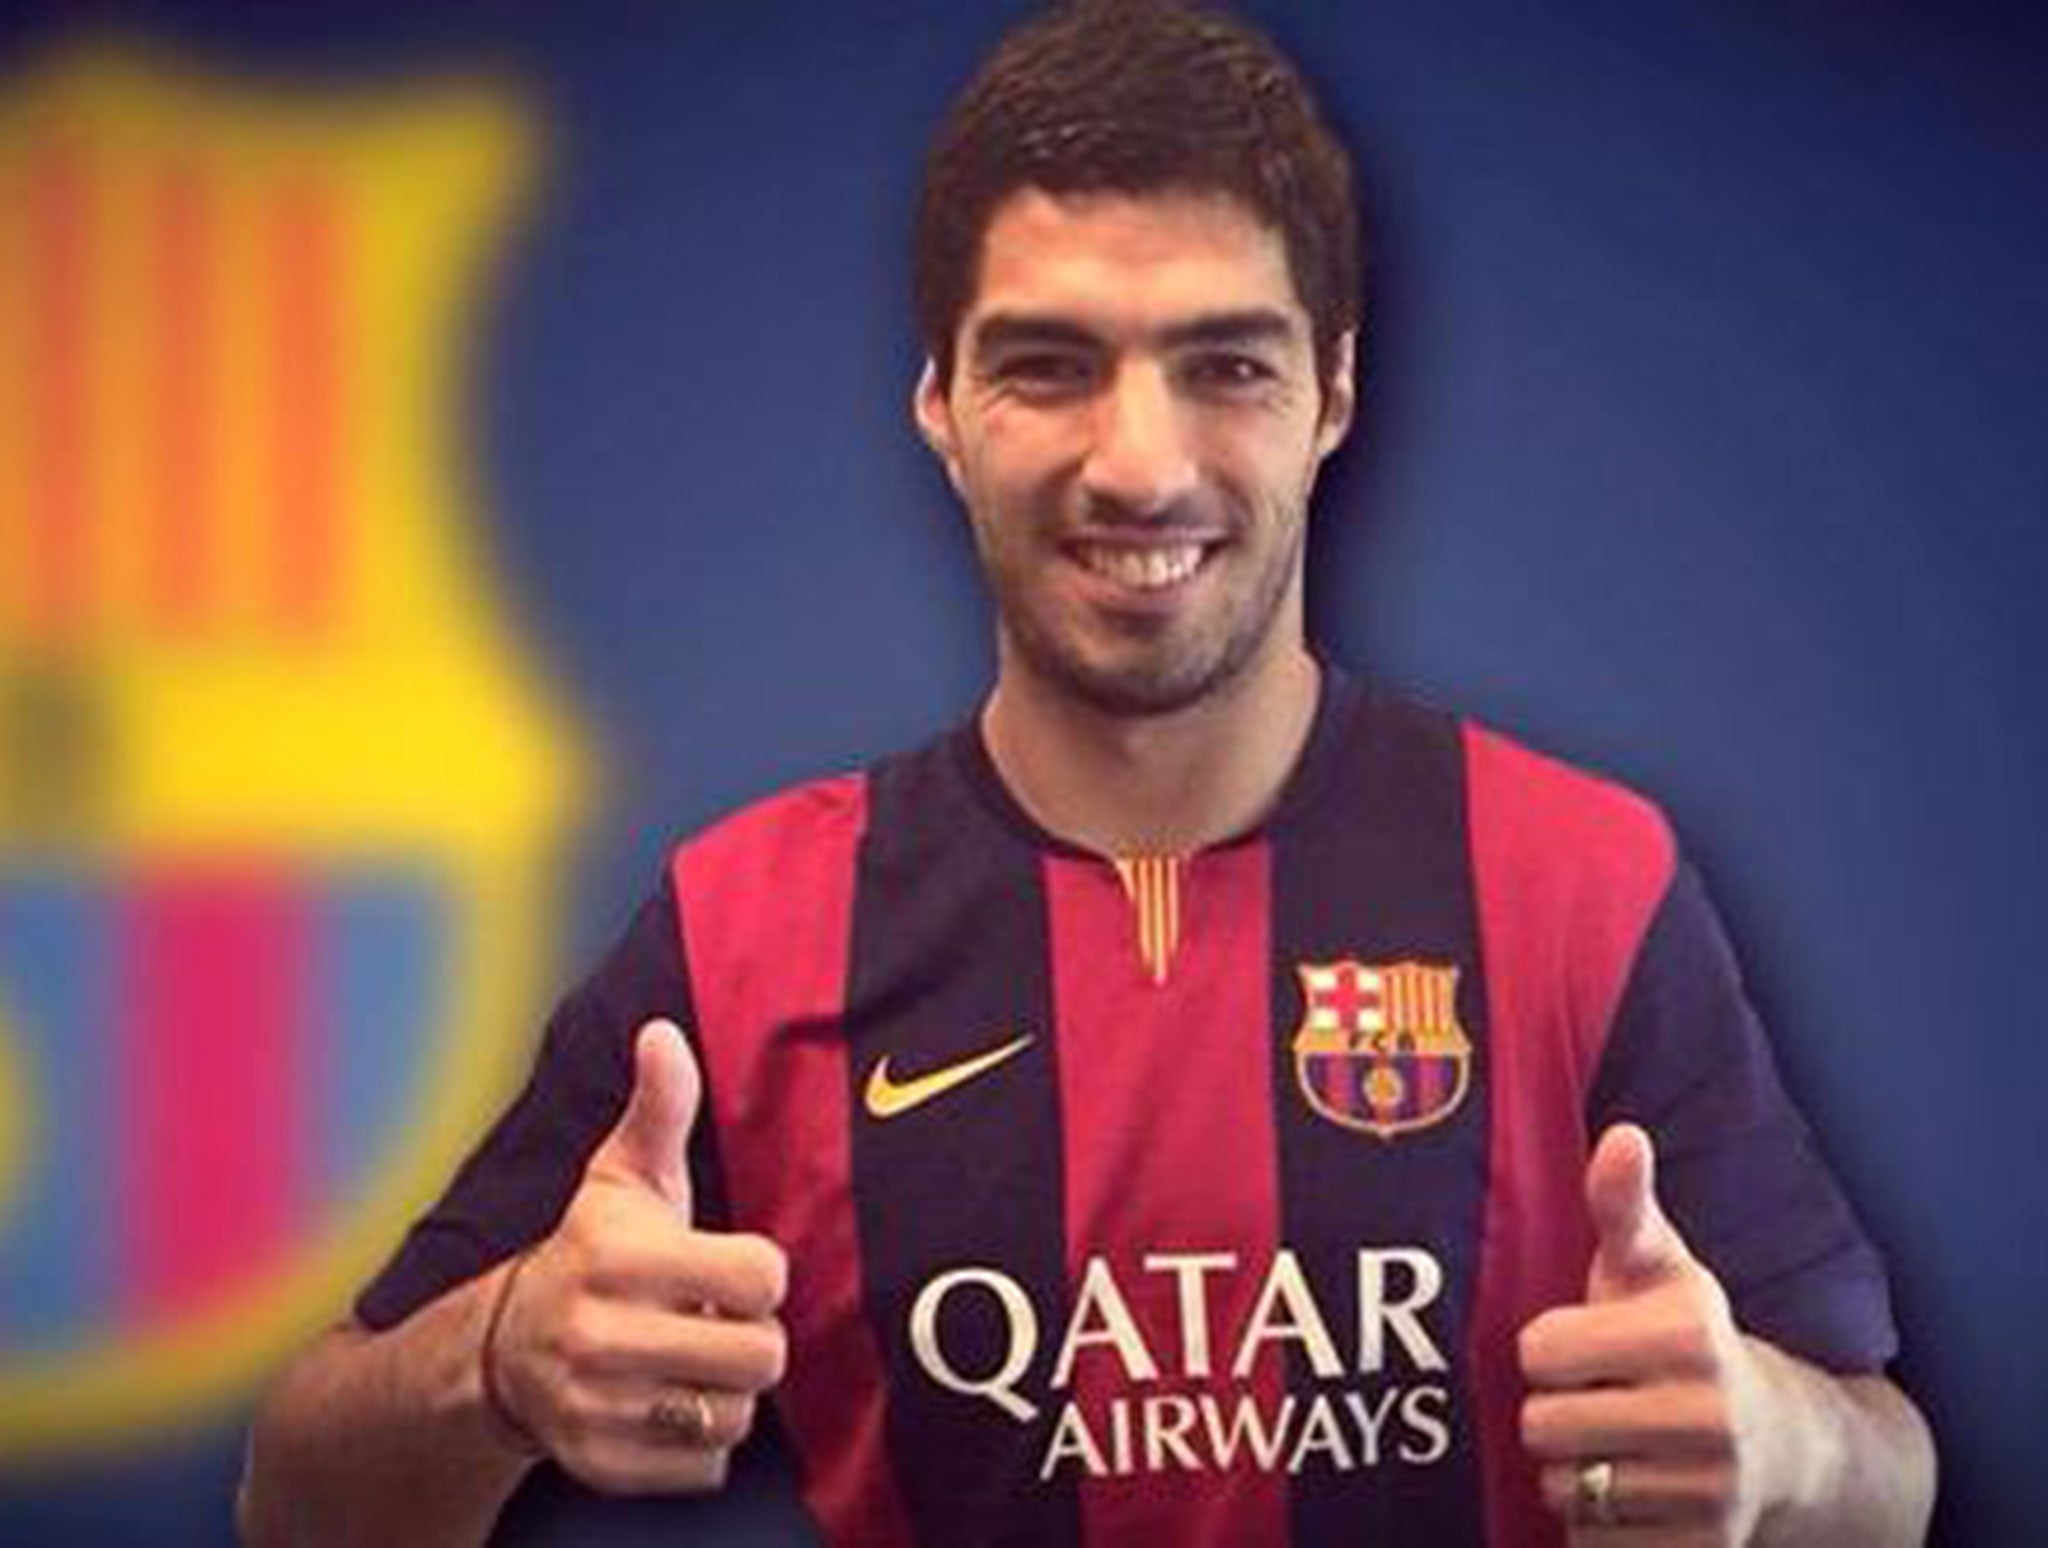 Luis Suarez has officially joined Barcelona for £75m